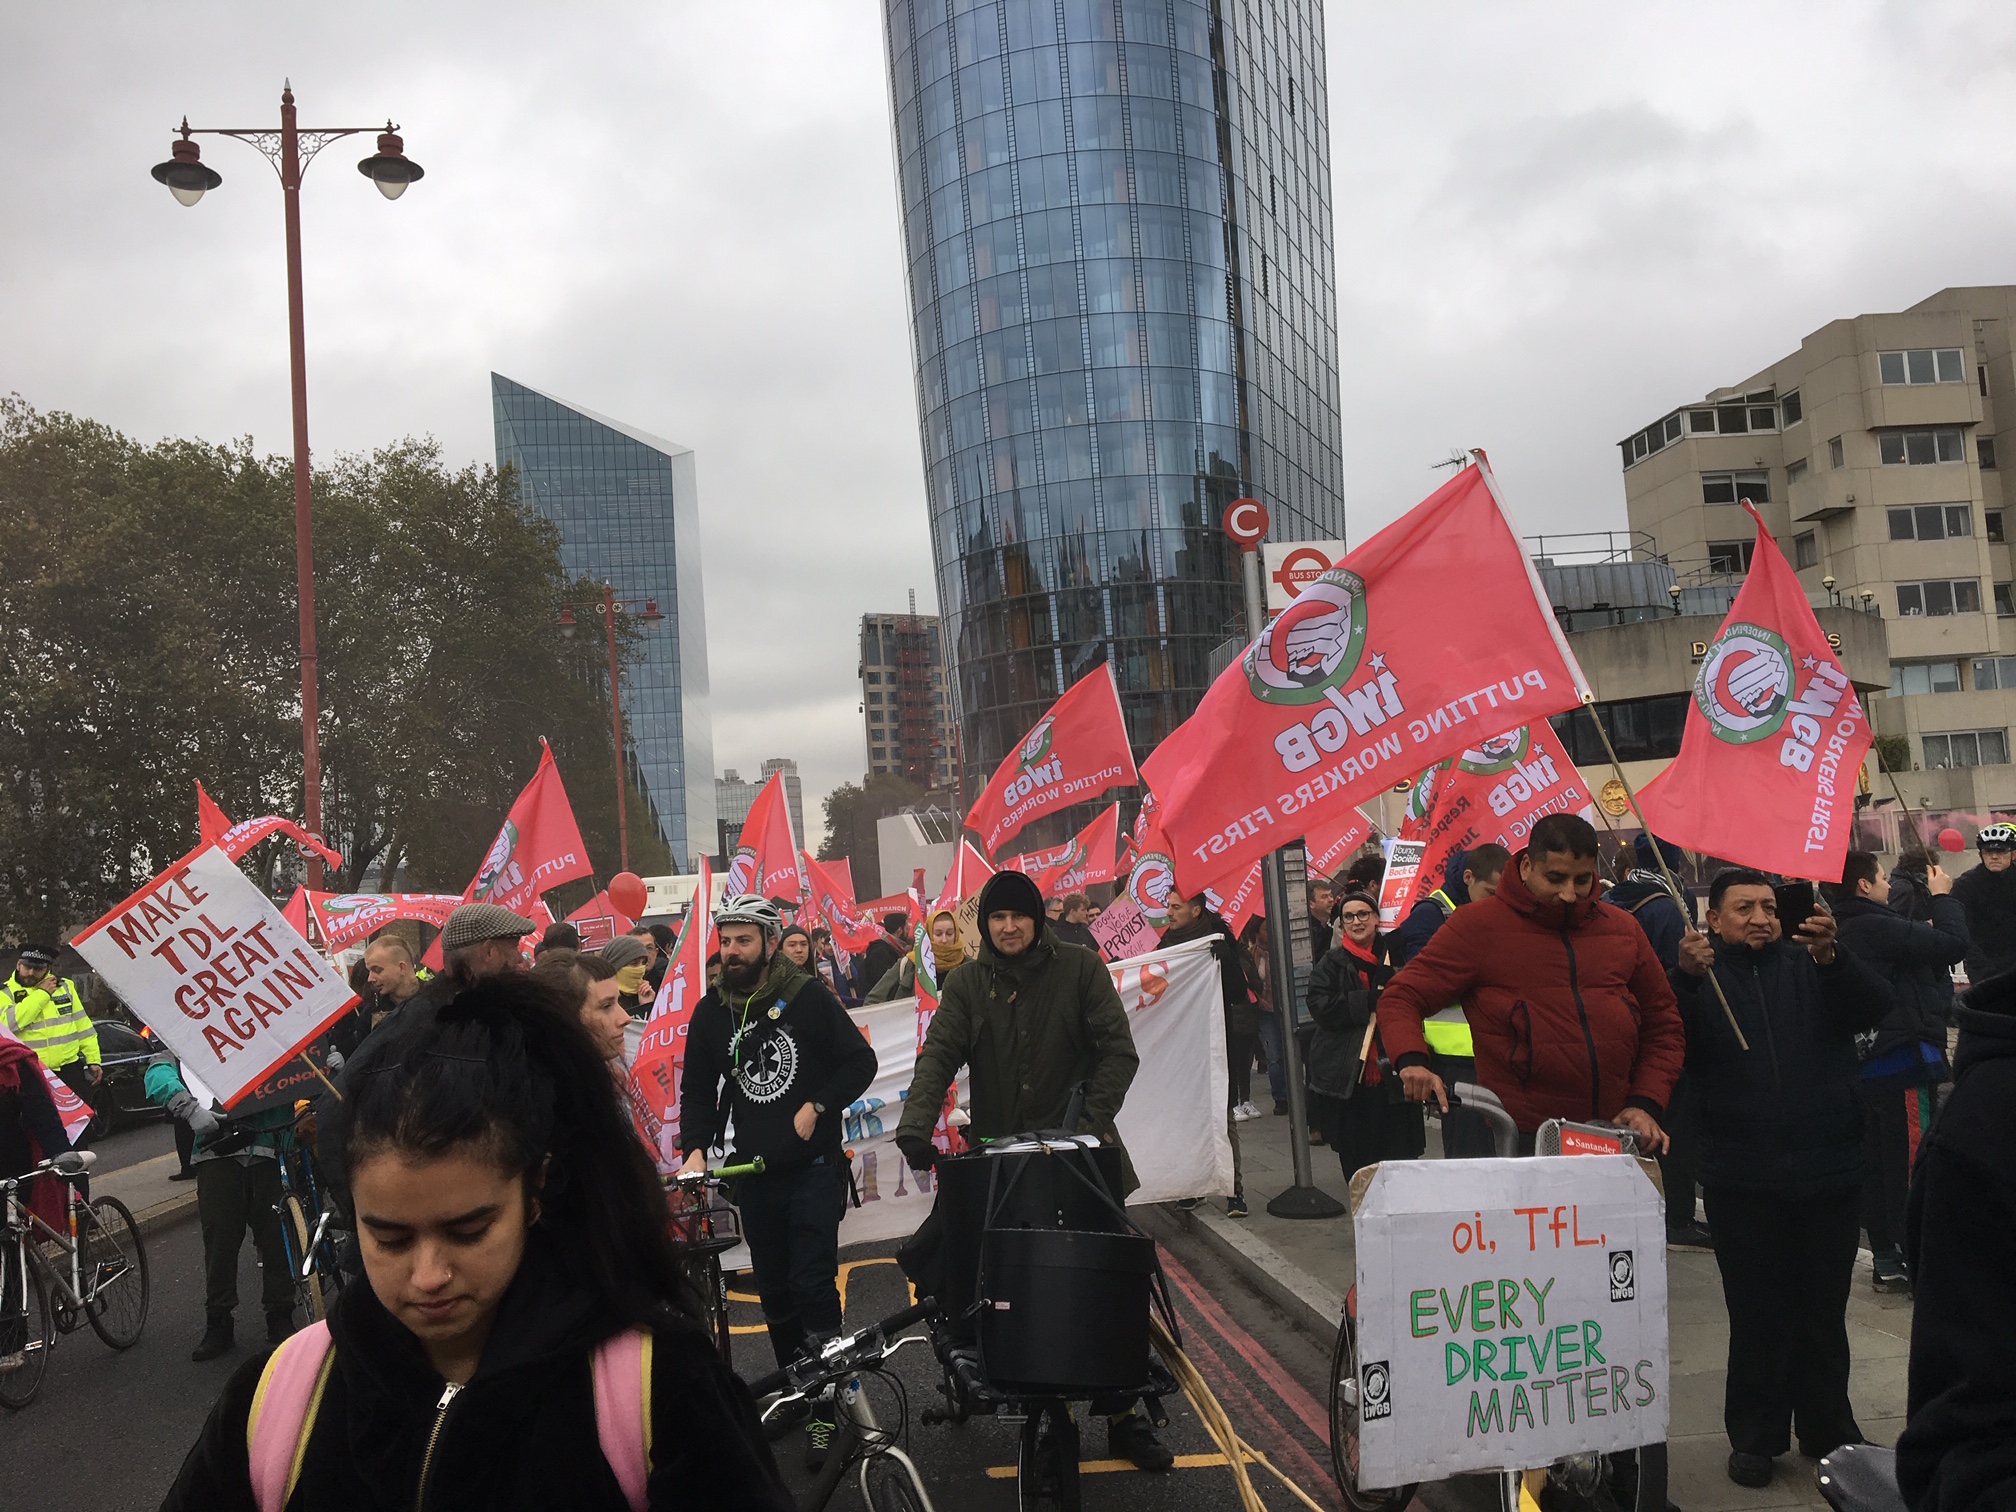 Precarious workers march against the gig economy, 30.10.18, credit: Paula Mitchell (uploaded 30/10/2018)